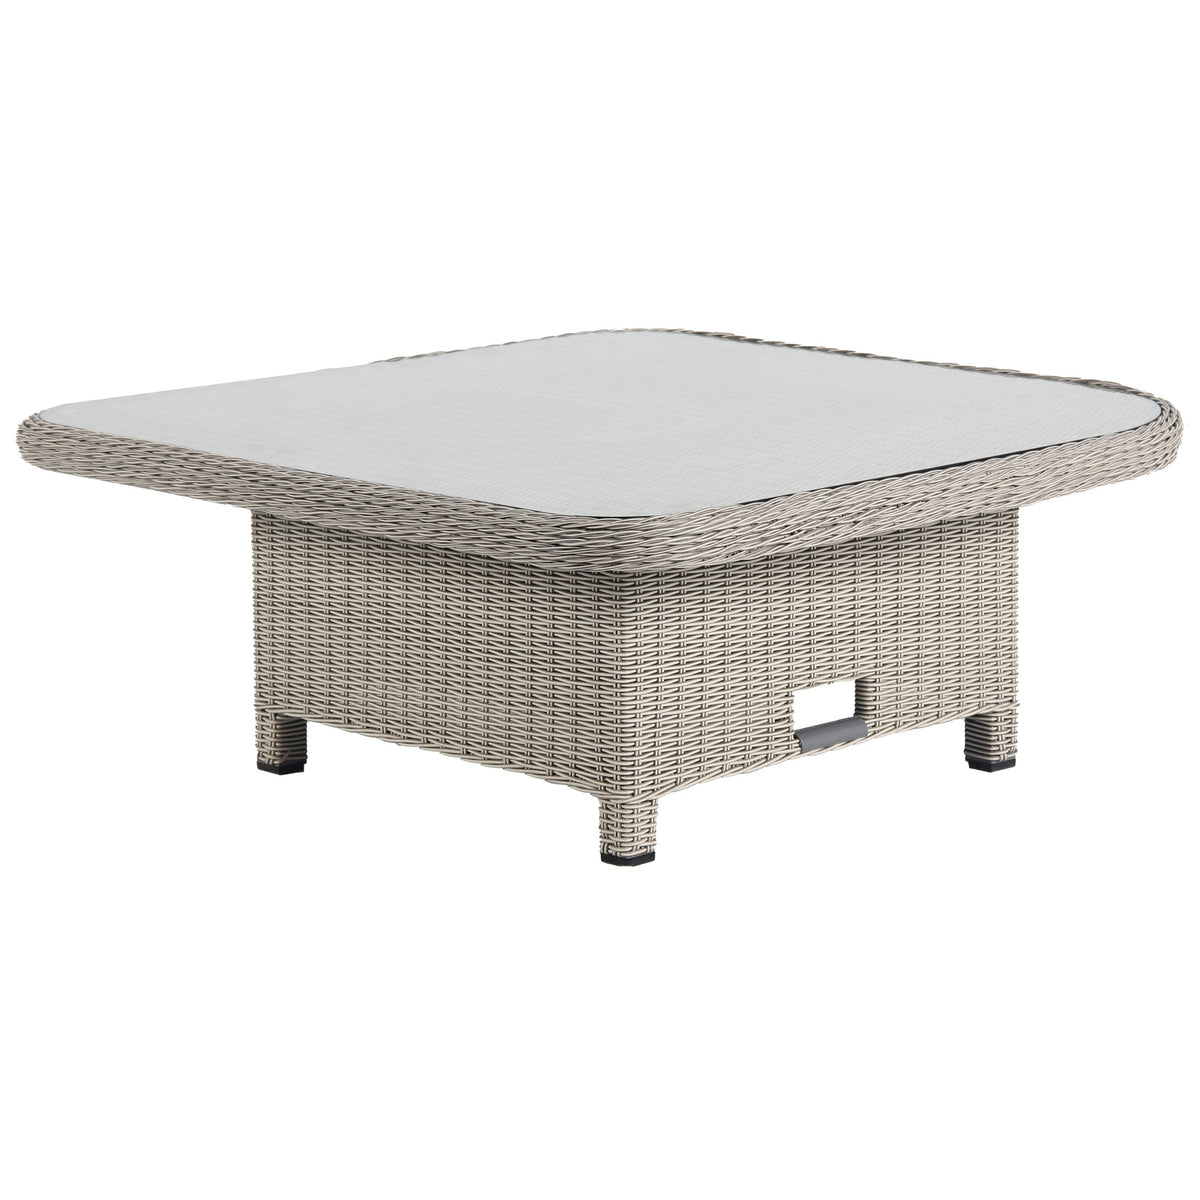 Kettler Palma Signature Grande White Wash Wicker High Low Adjustable Glass Top Table